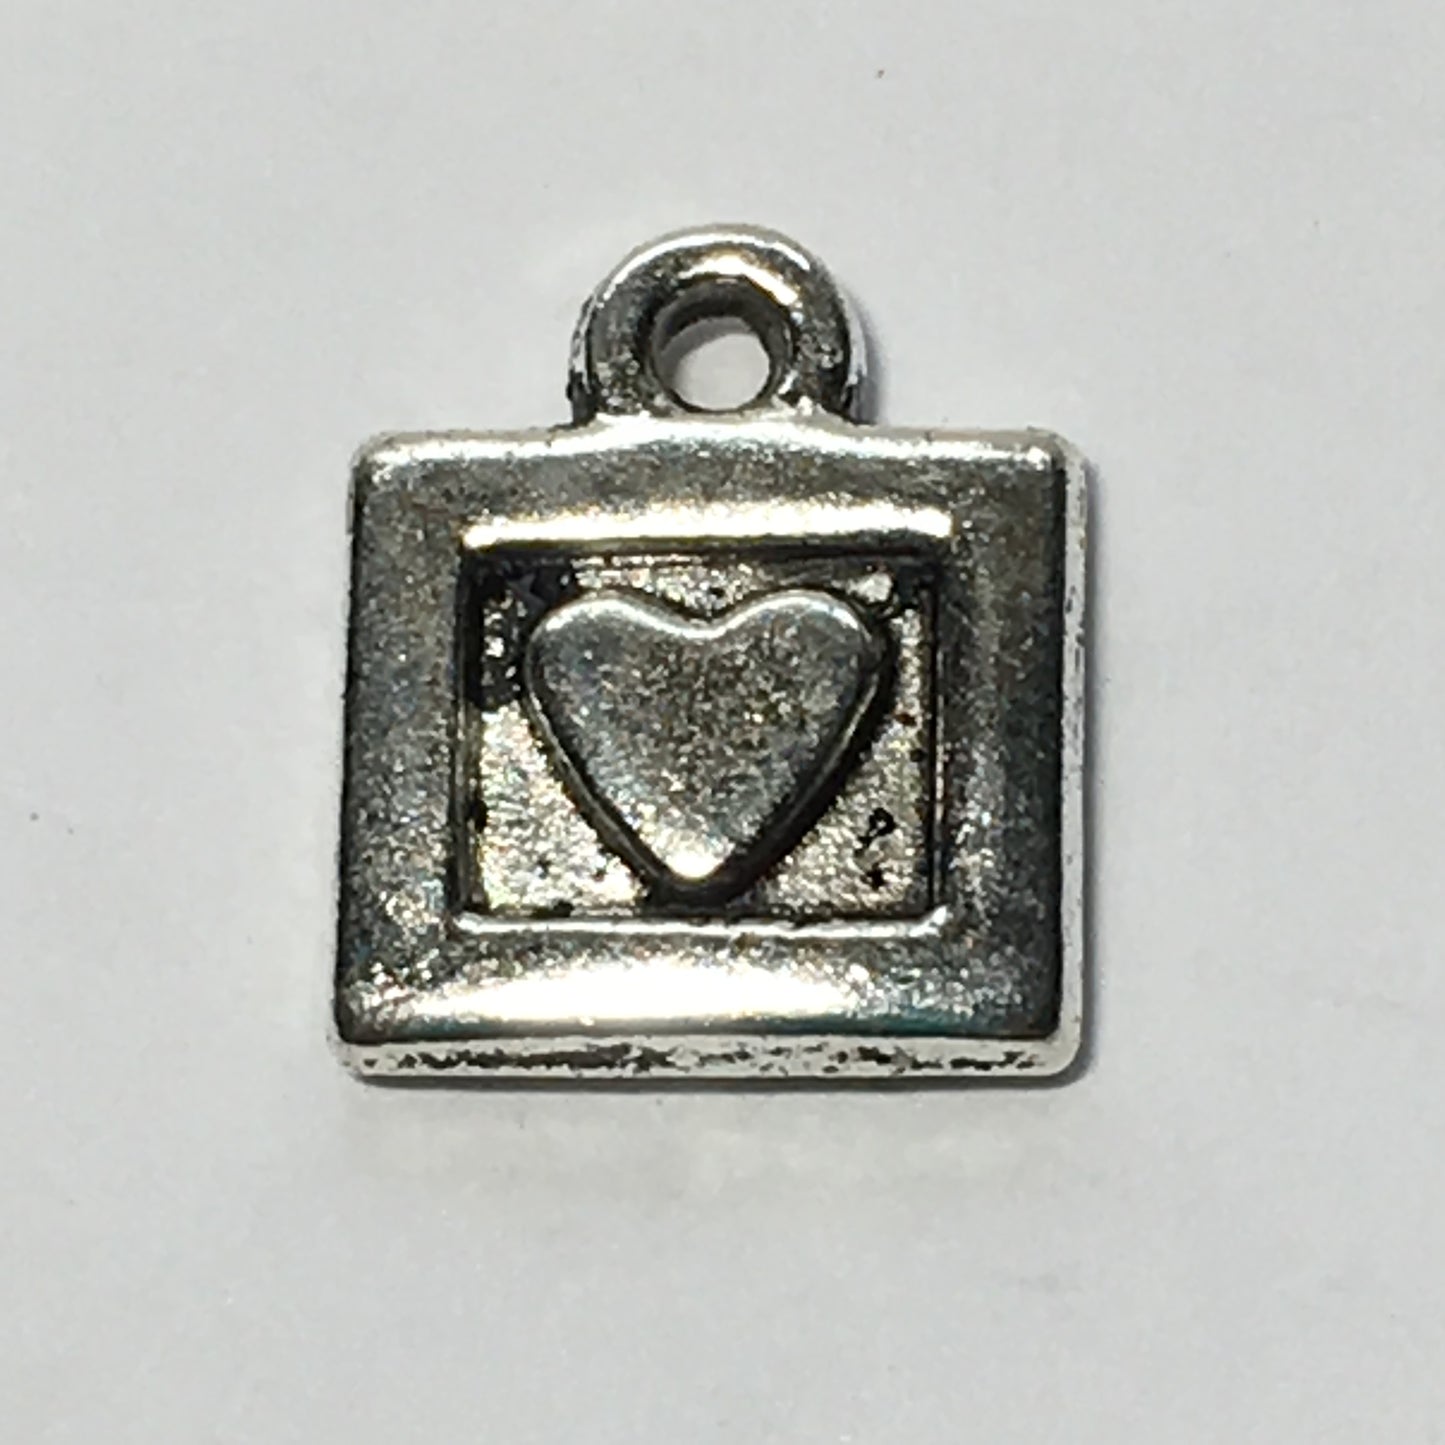 Antique Silver Square Heart Charm, 11 x 9 mm